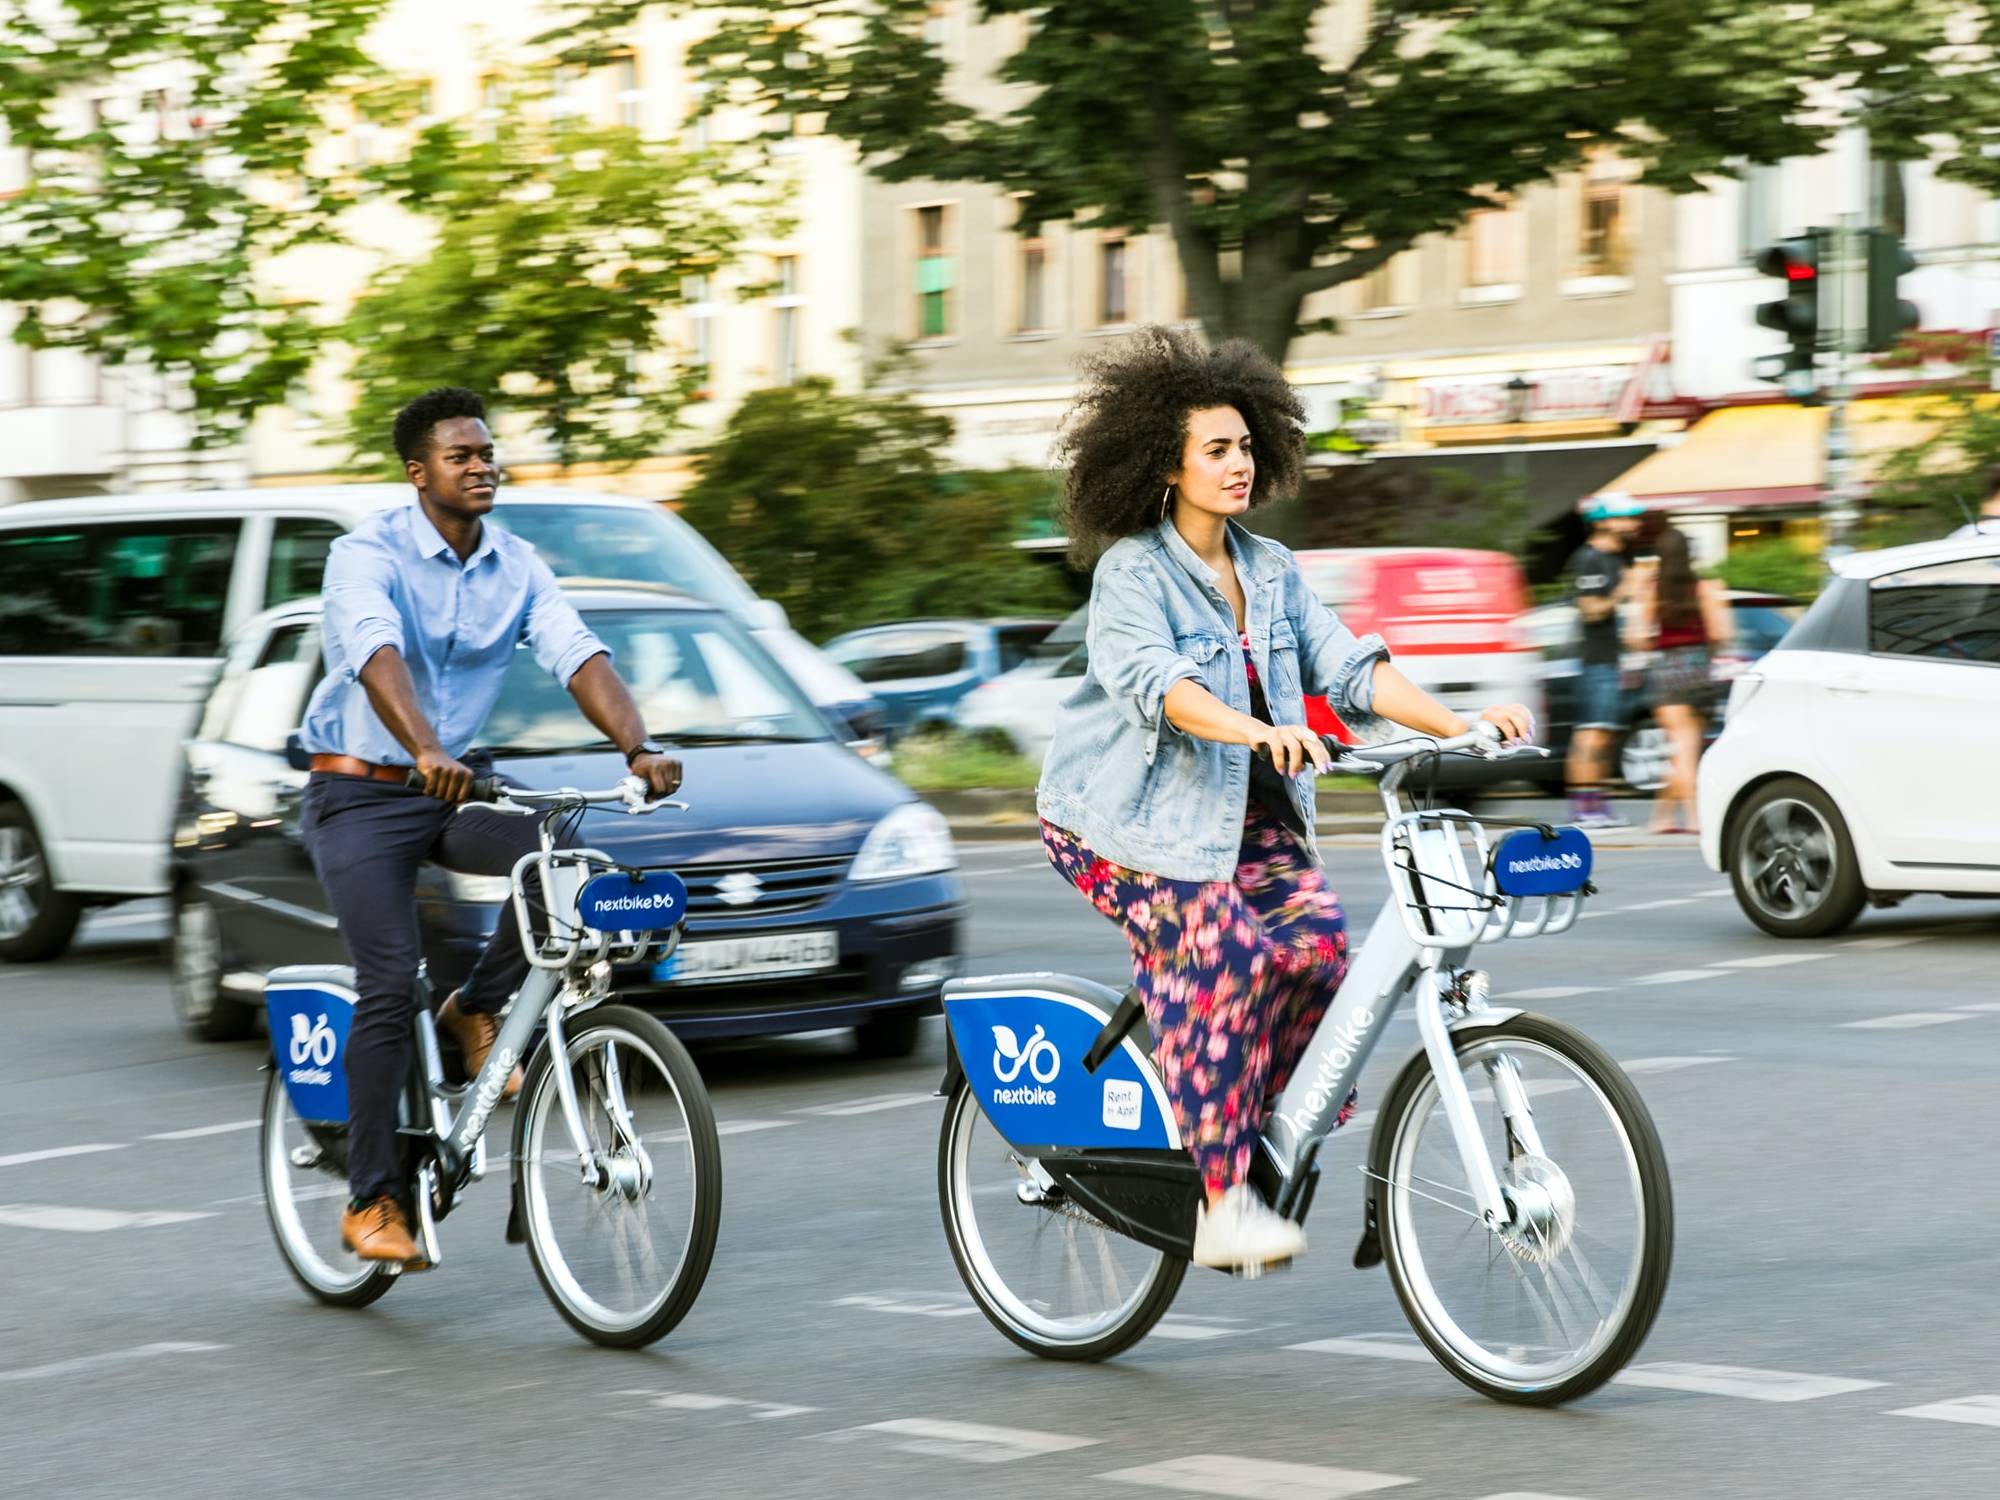 3 biking rules to keep everyone on the road safe